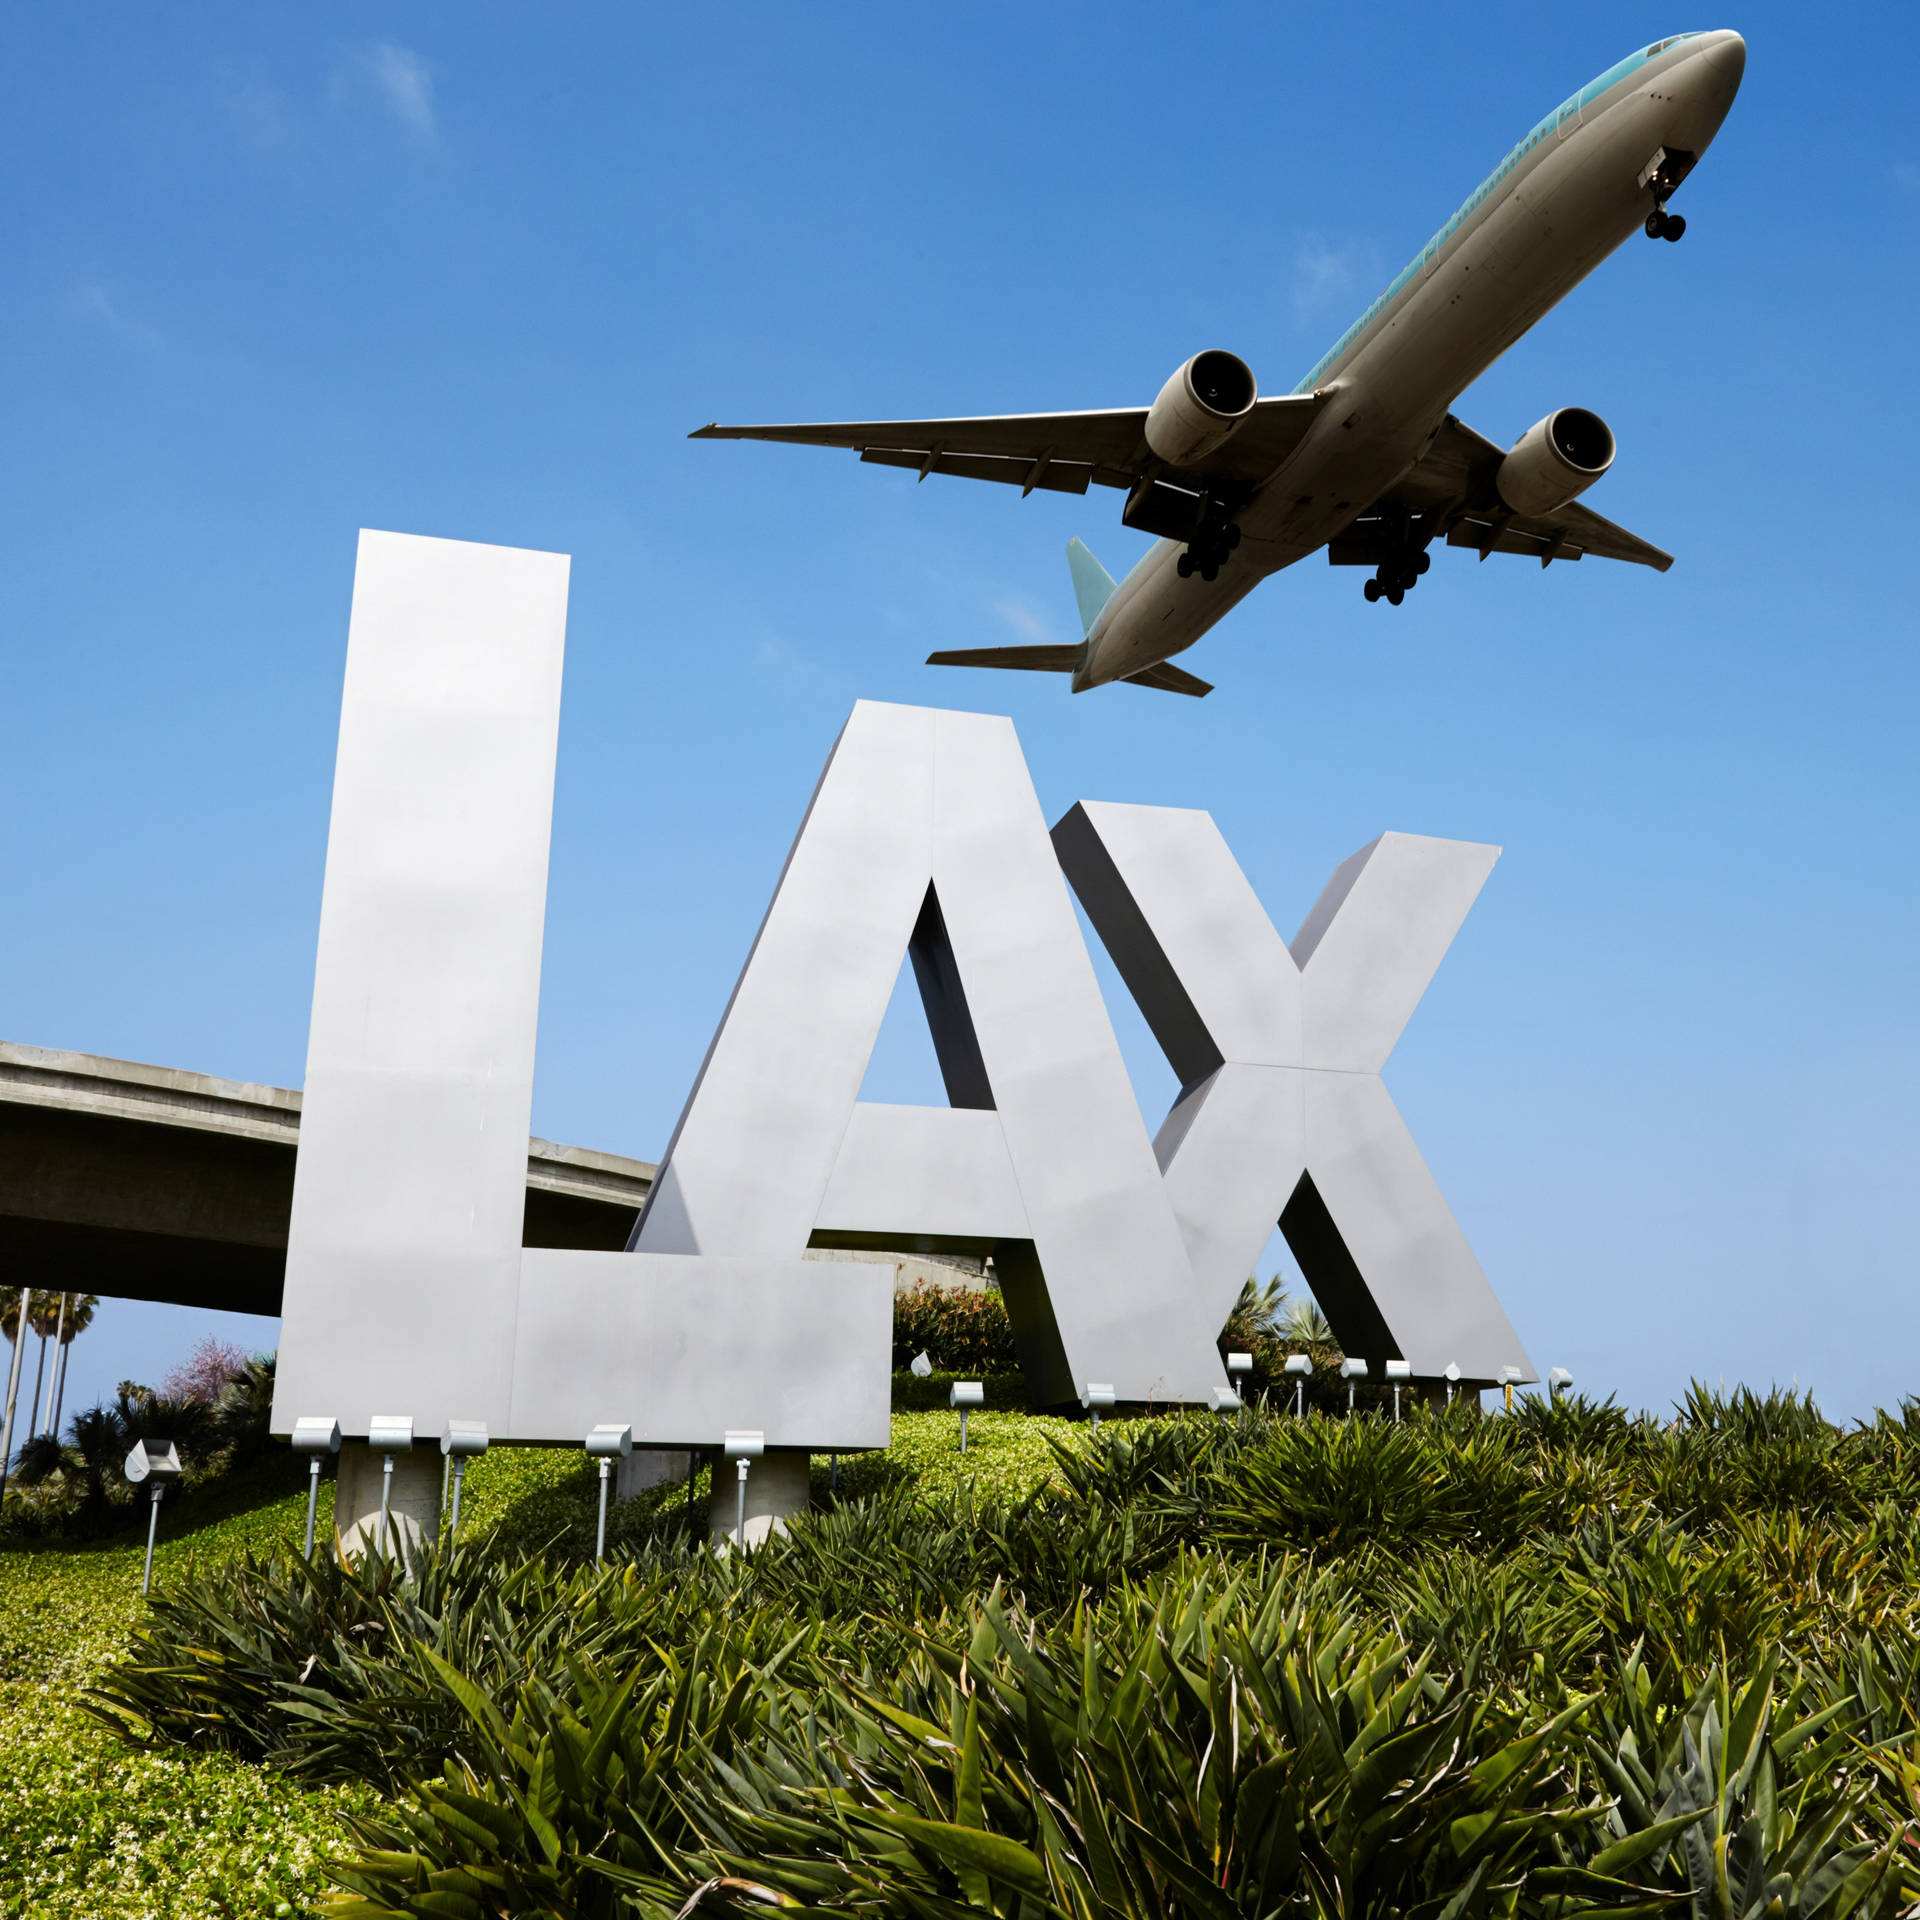 Lax Pictures  Download Free Images on Unsplash